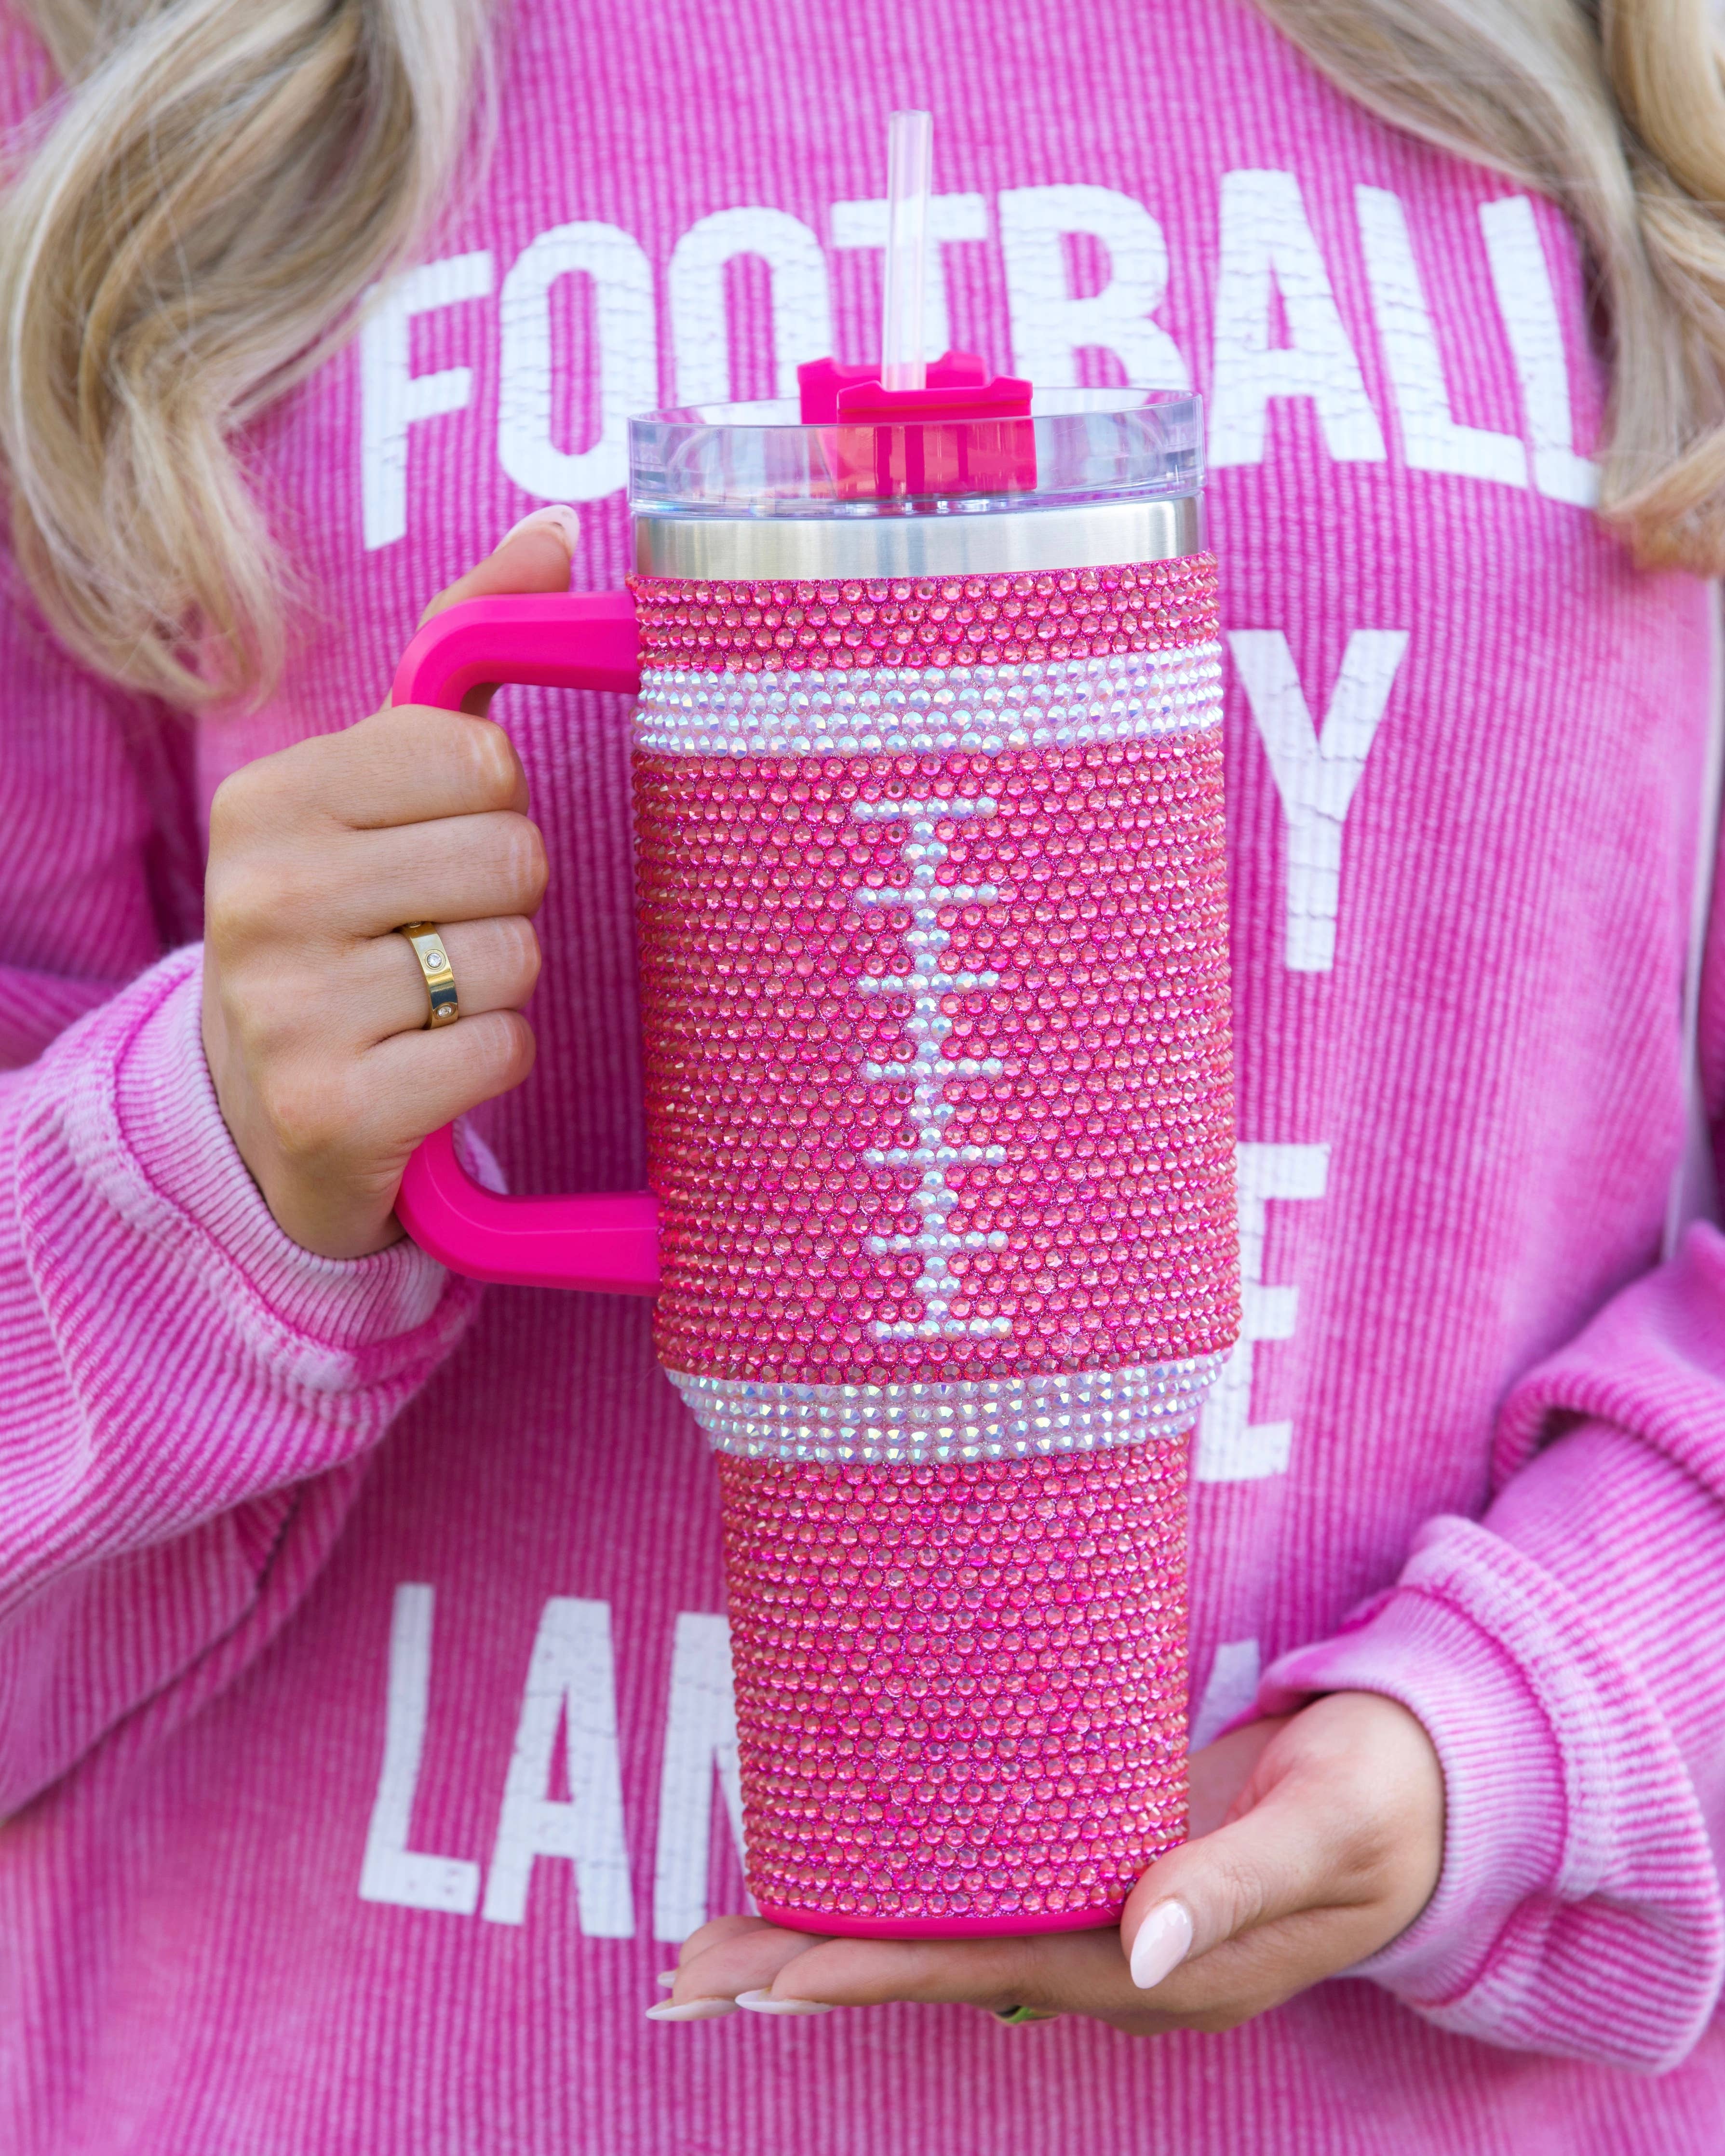 LIMITED EDITION Pink Crystal Football "Blinged Out" Tumbler